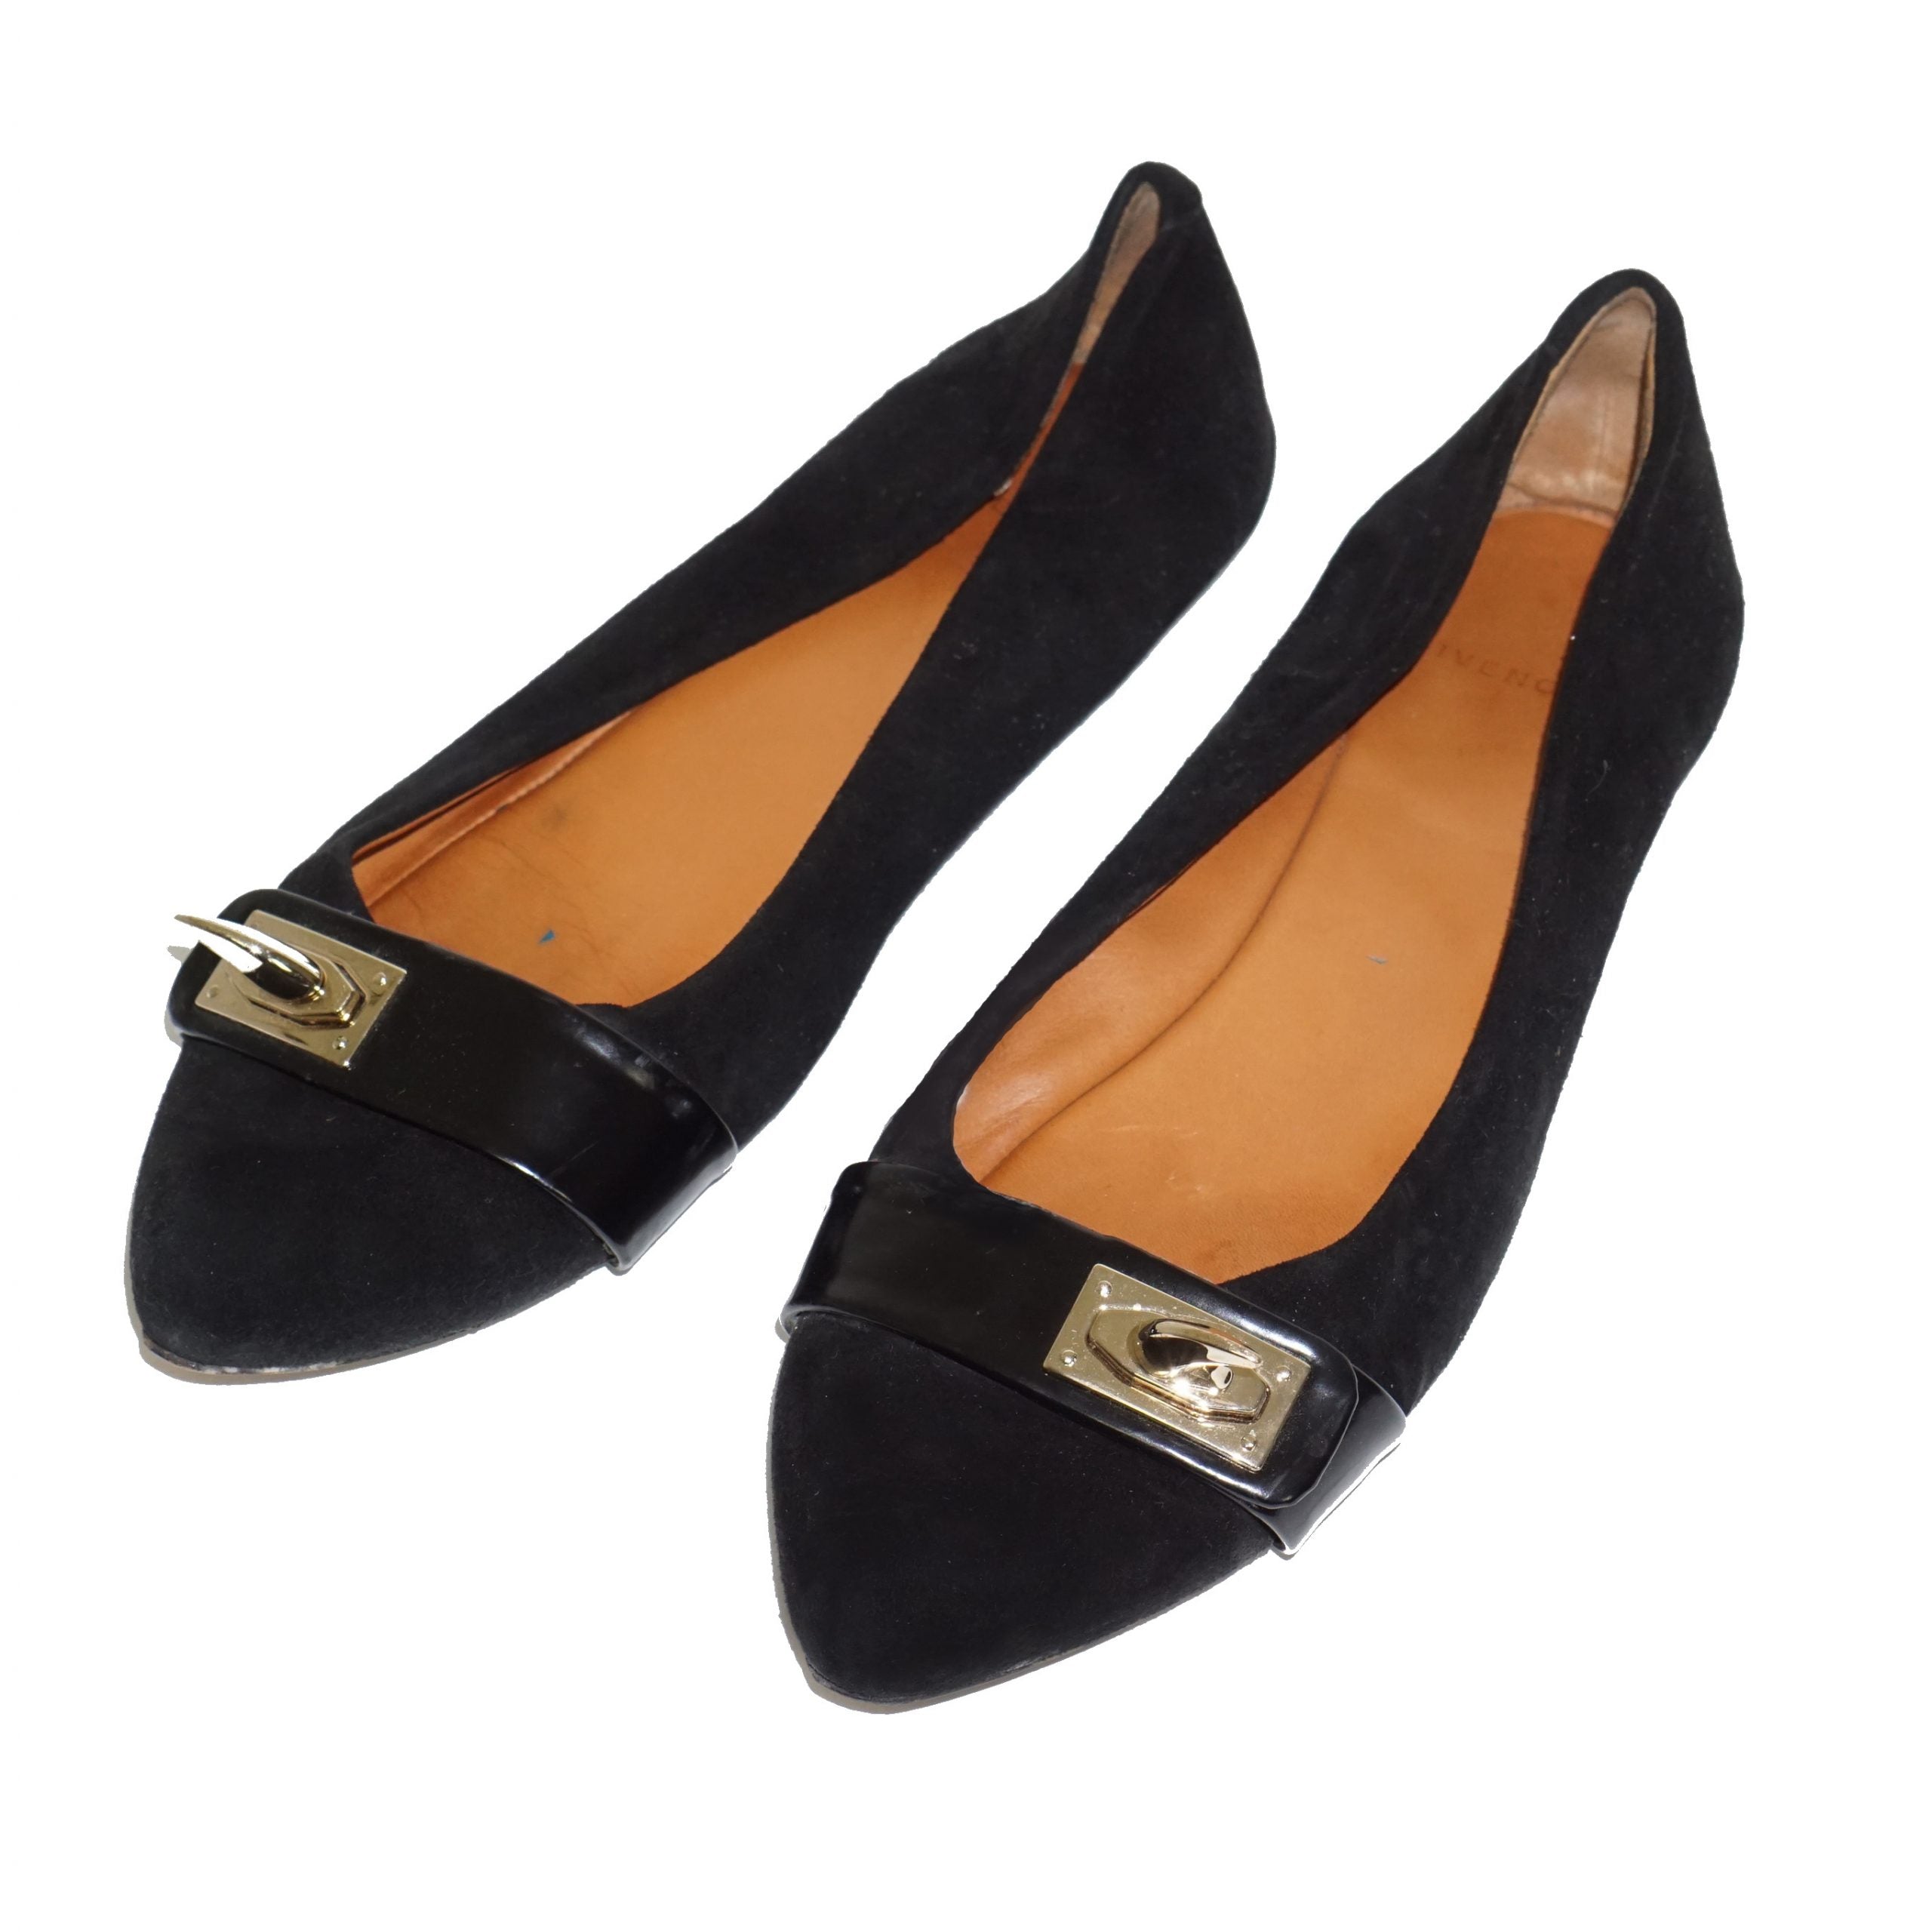 GIVENCHY Gold Hardware Suede Flats Shoes by Click On Trend